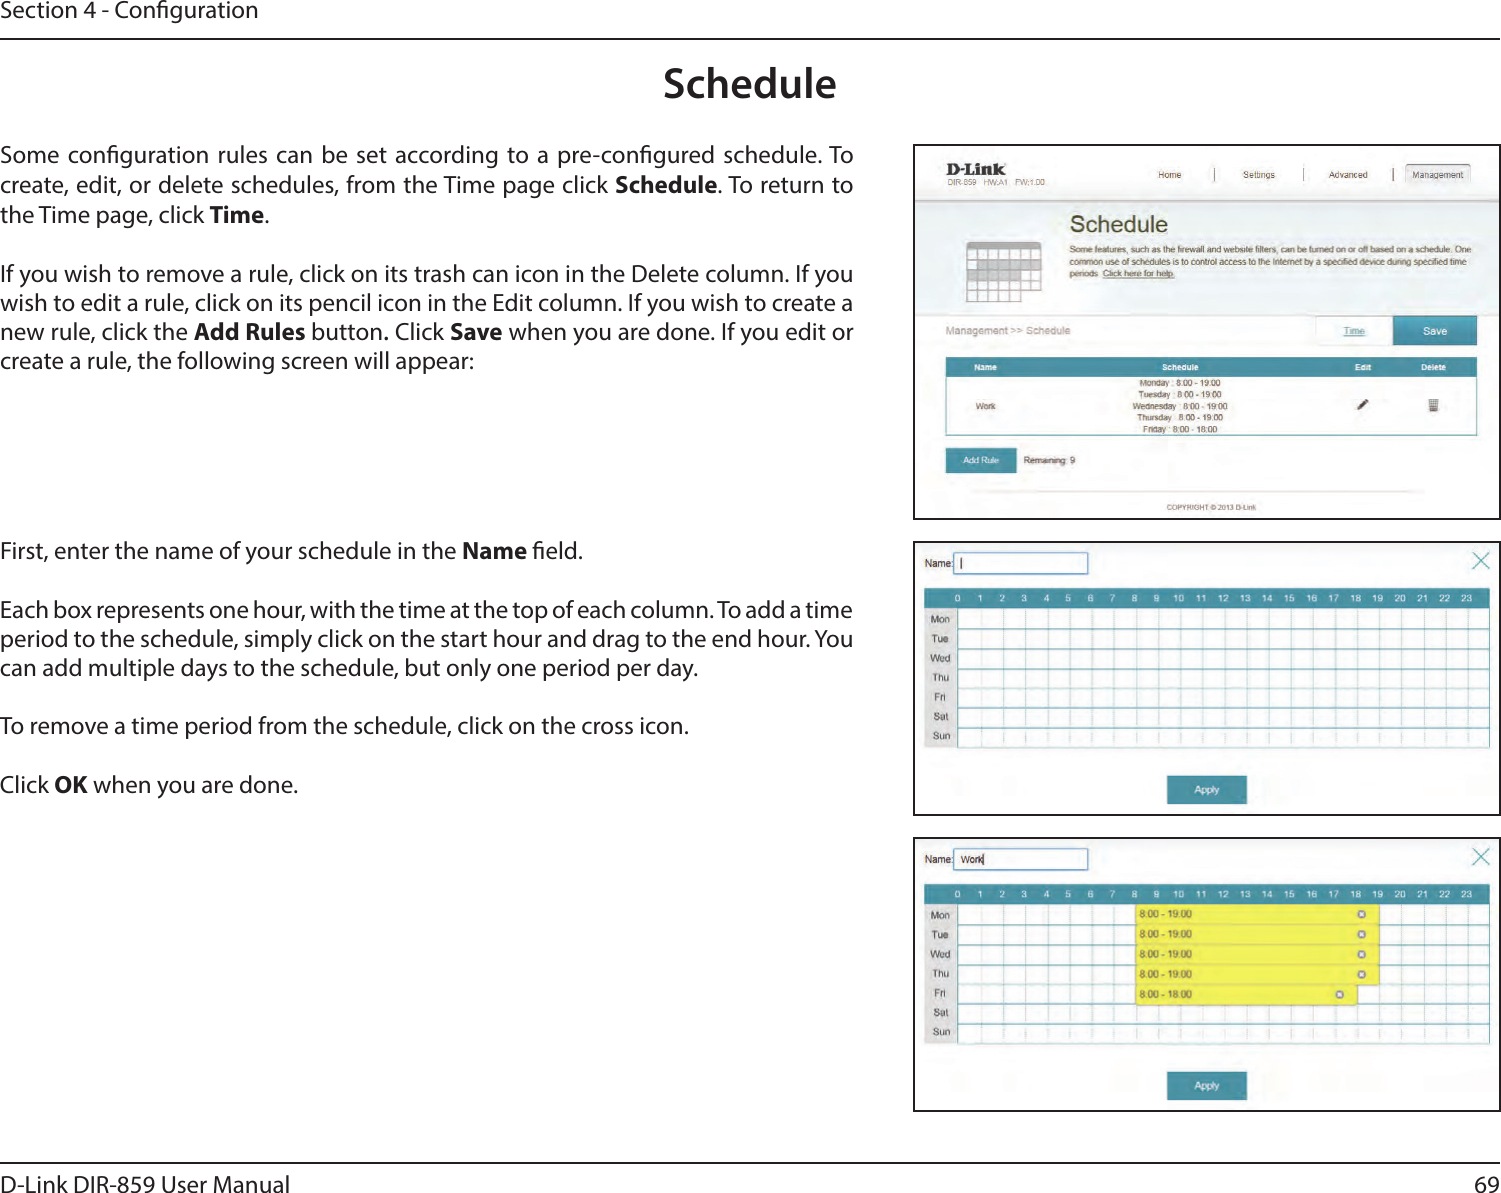 69D-Link DIR-859 User ManualSection 4 - CongurationScheduleSome conguration rules can be set according to a pre-congured schedule. To create, edit, or delete schedules, from the Time page click Schedule. To return to the Time page, click Time. If you wish to remove a rule, click on its trash can icon in the Delete column. If you wish to edit a rule, click on its pencil icon in the Edit column. If you wish to create a new rule, click the Add Rules button. Click Save when you are done. If you edit or create a rule, the following screen will appear:First, enter the name of your schedule in the Name eld.Each box represents one hour, with the time at the top of each column. To add a time period to the schedule, simply click on the start hour and drag to the end hour. You can add multiple days to the schedule, but only one period per day.To remove a time period from the schedule, click on the cross icon.Click OK when you are done.